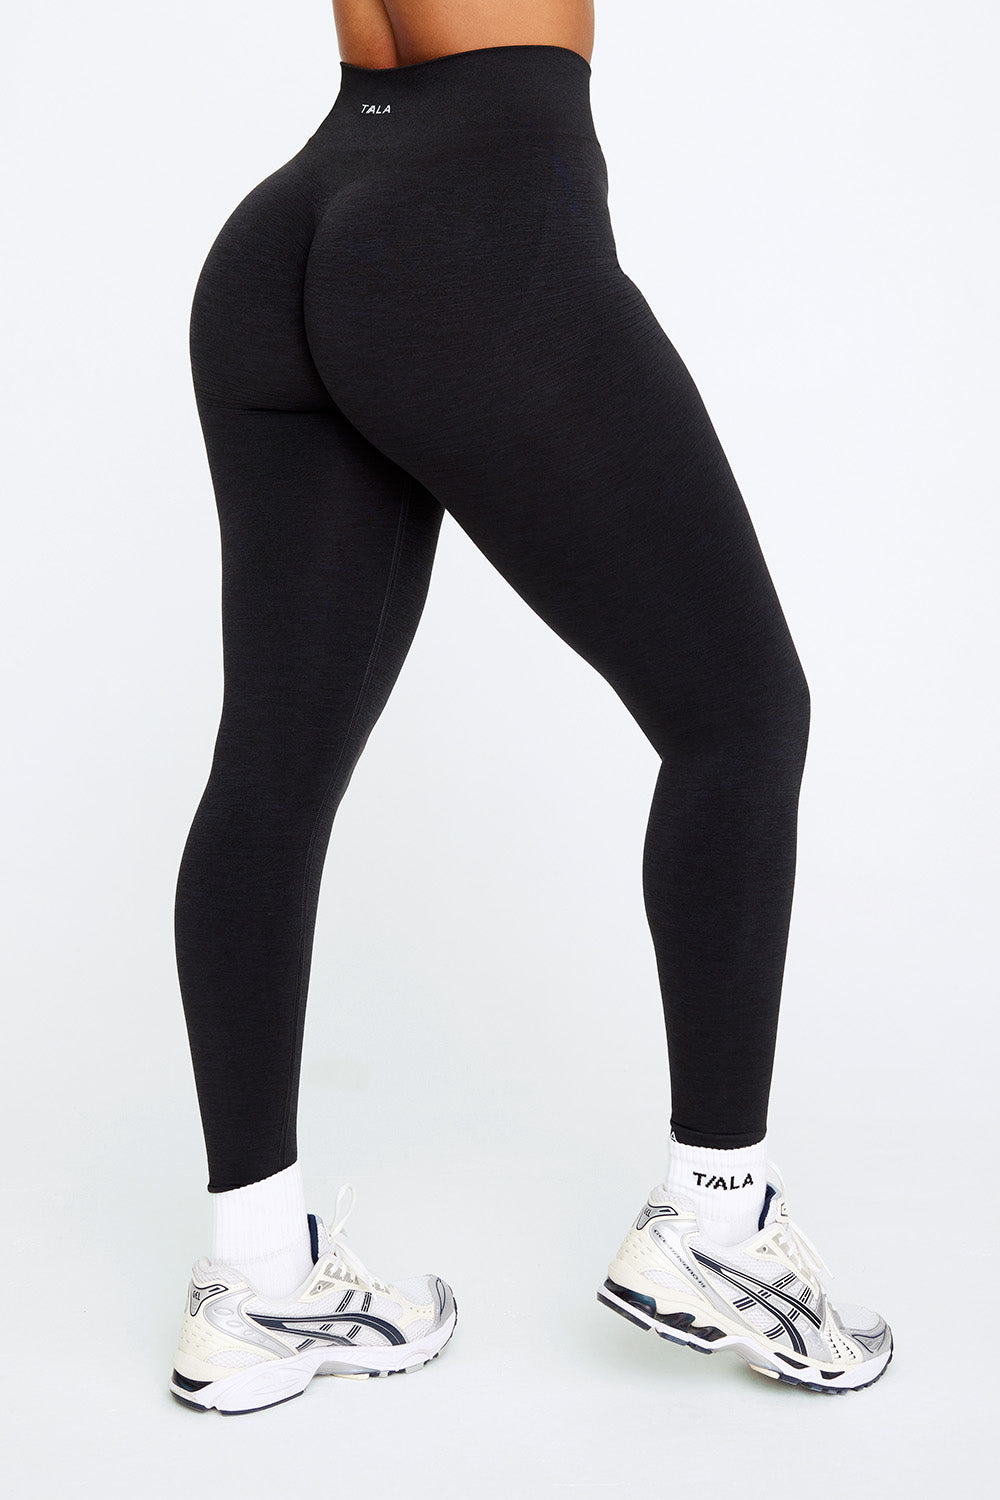 Signature Scrunch 7/8 Leggings - Coffee - Muscle Nation